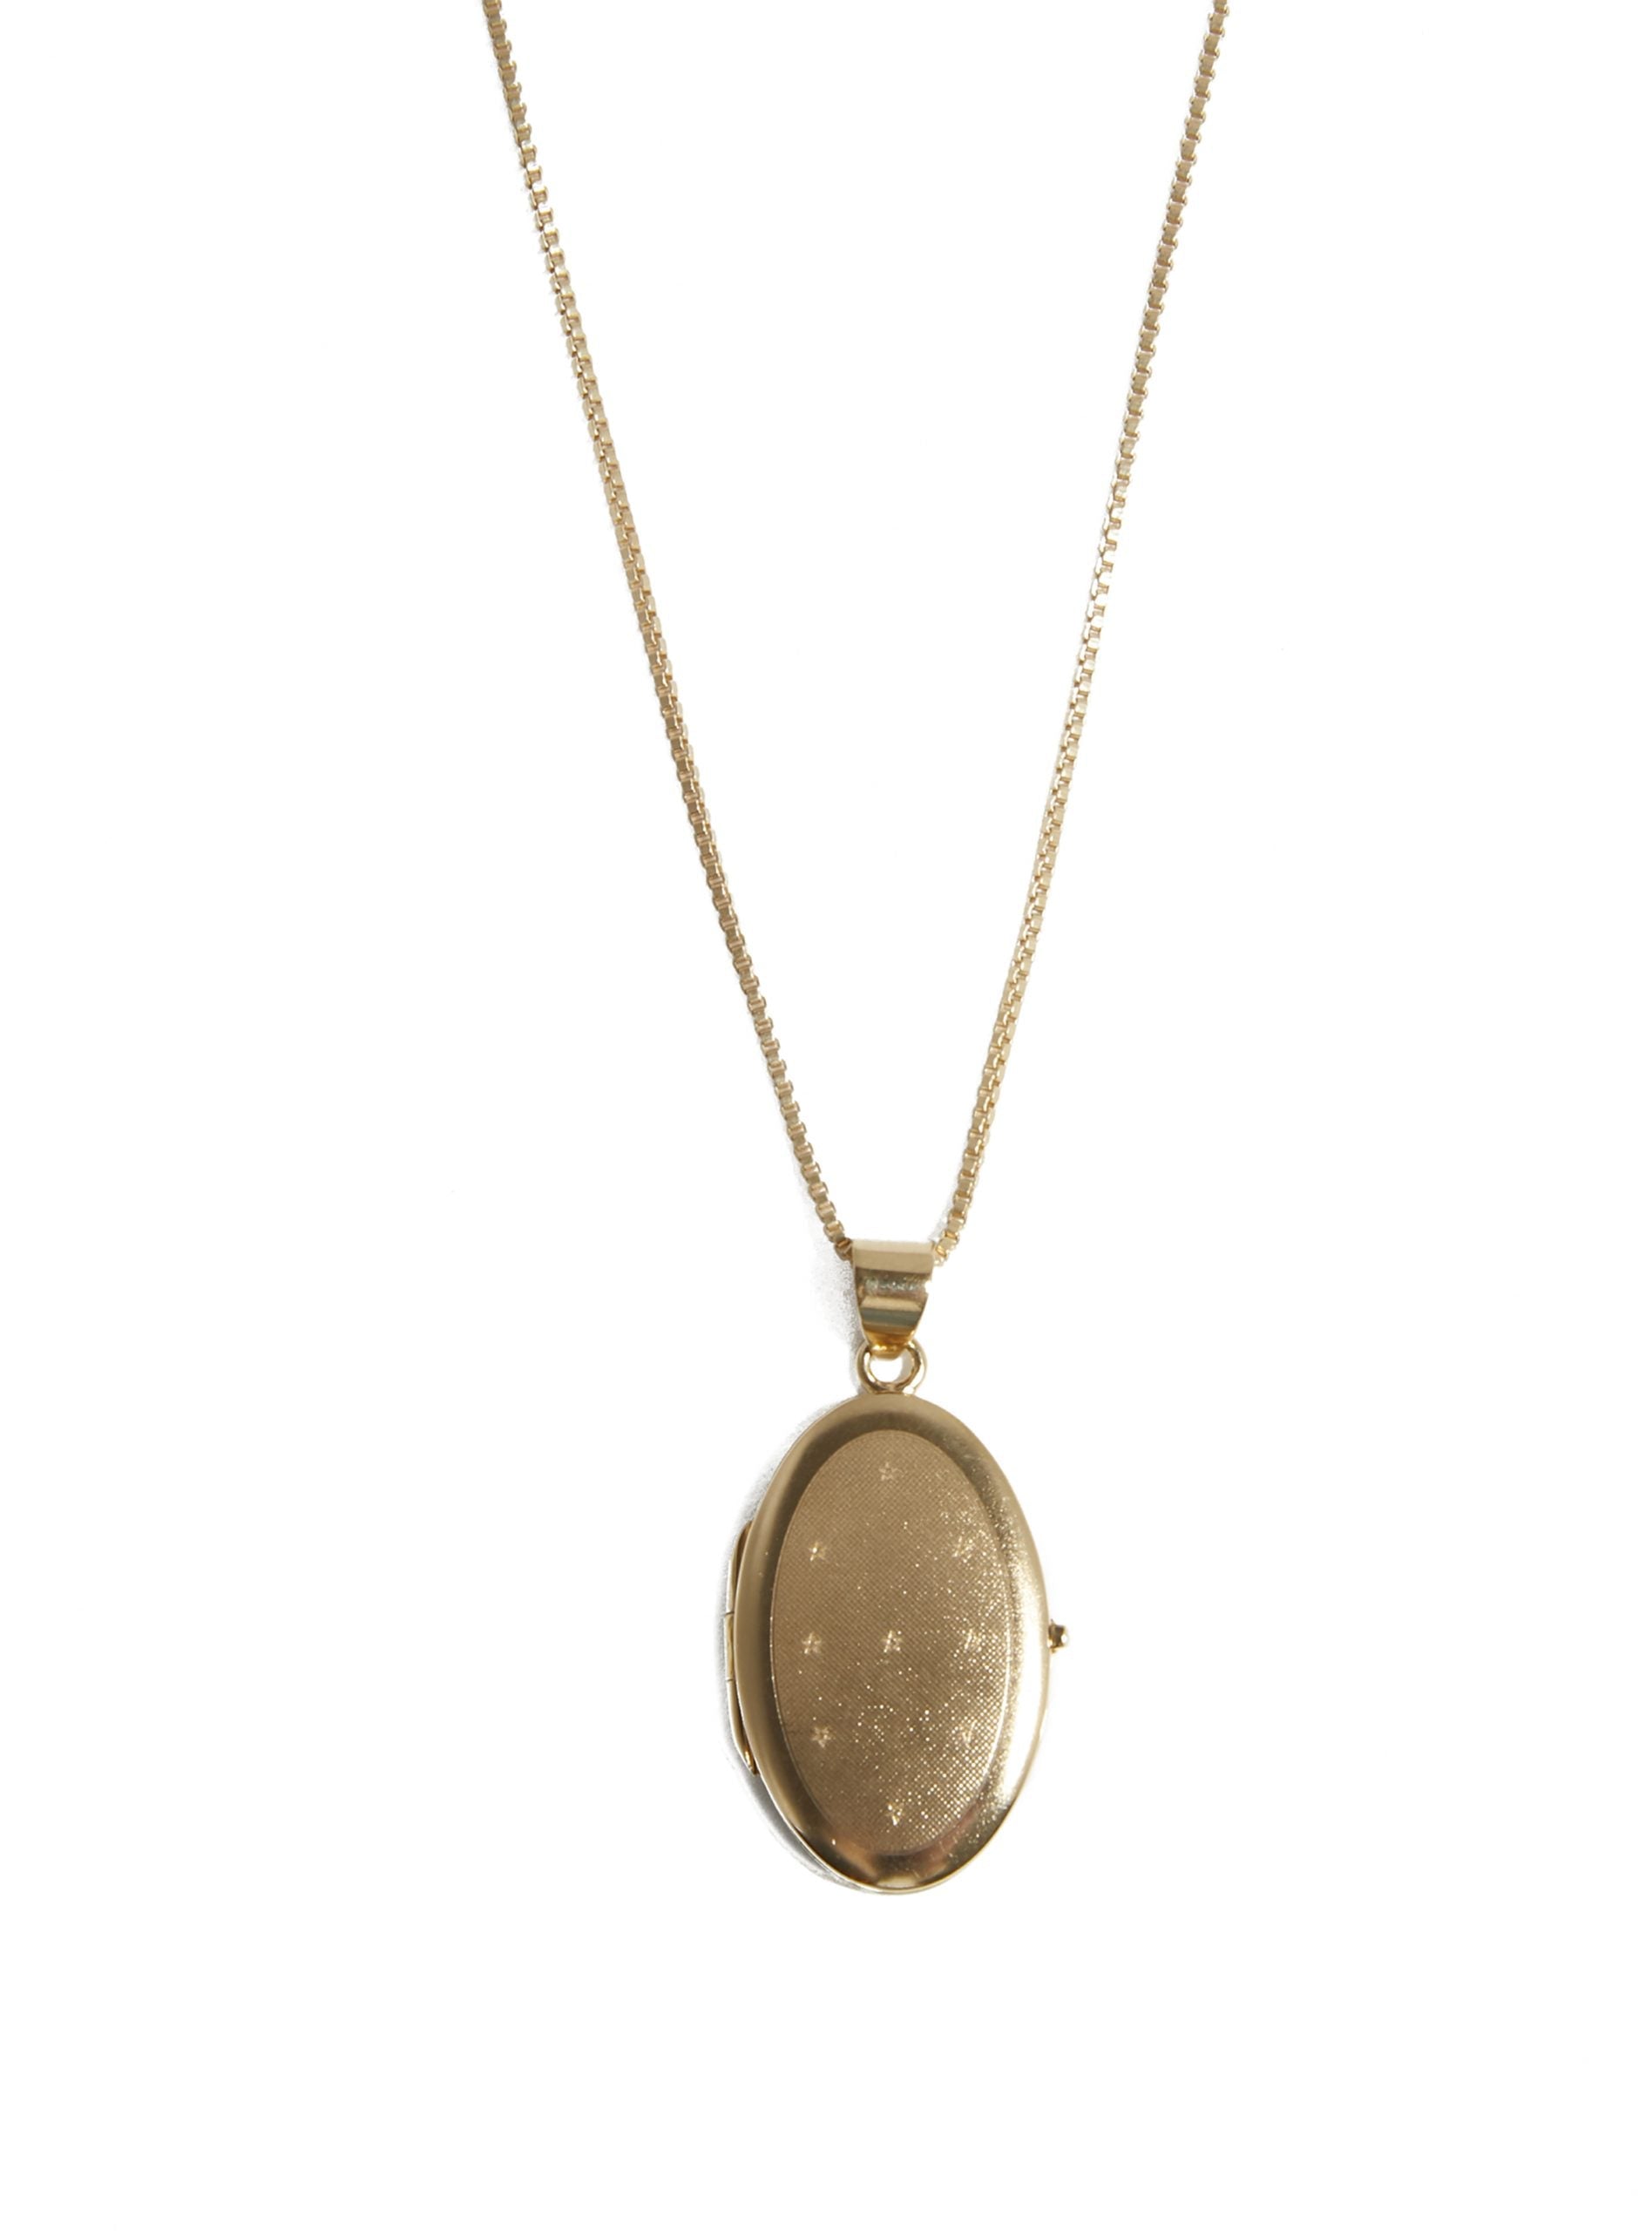 Dion Necklace Gold